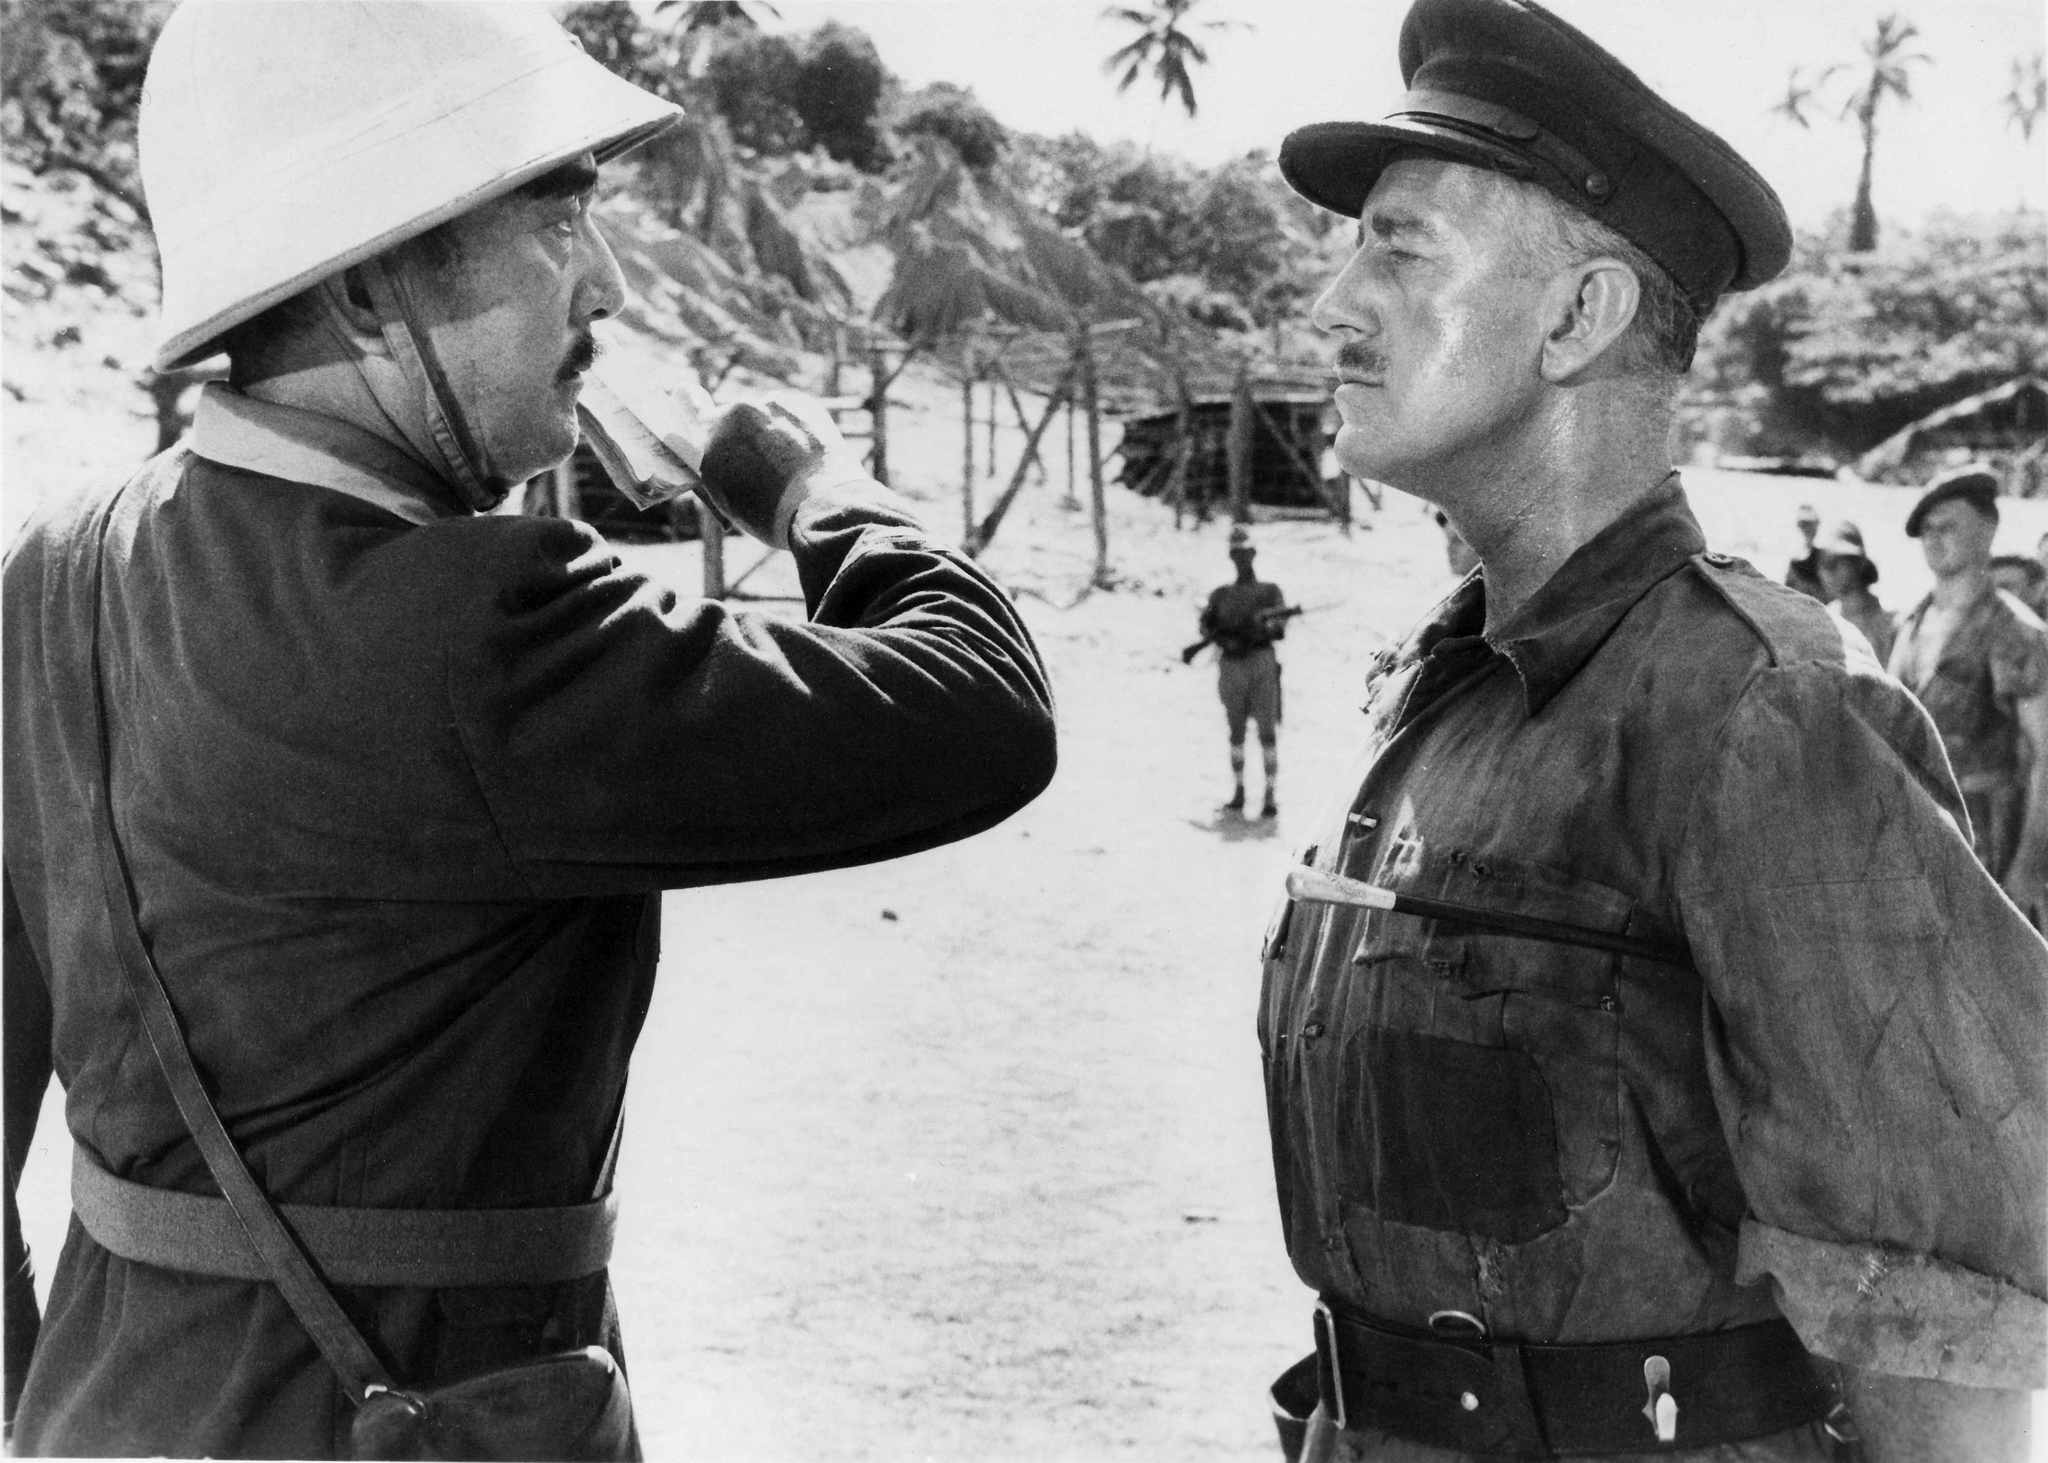 Still of Alec Guinness and Sessue Hayakawa in The Bridge on the River Kwai (1957)